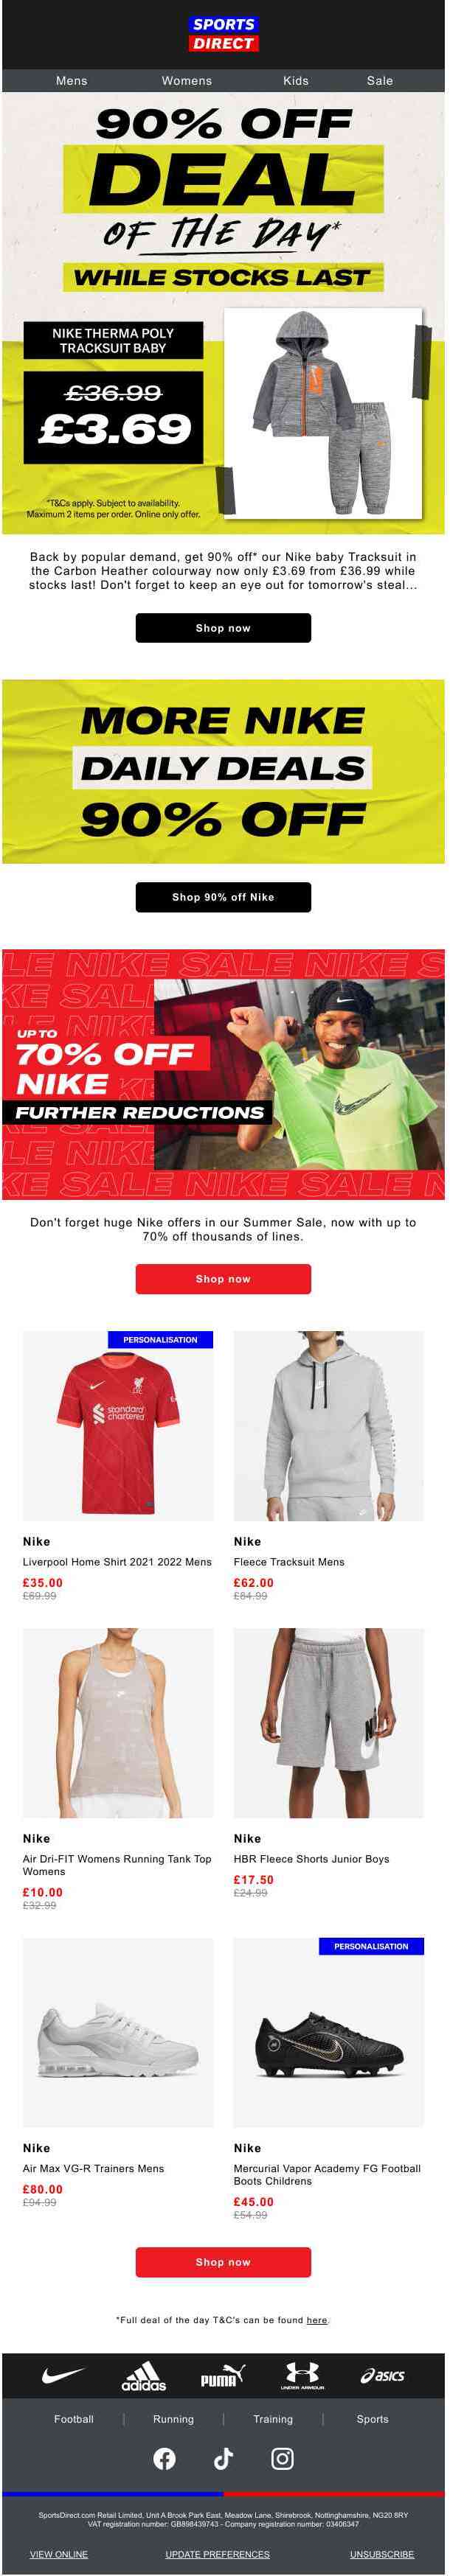 90% OFF: £3.69 Nike Tracksuit deal 🥳